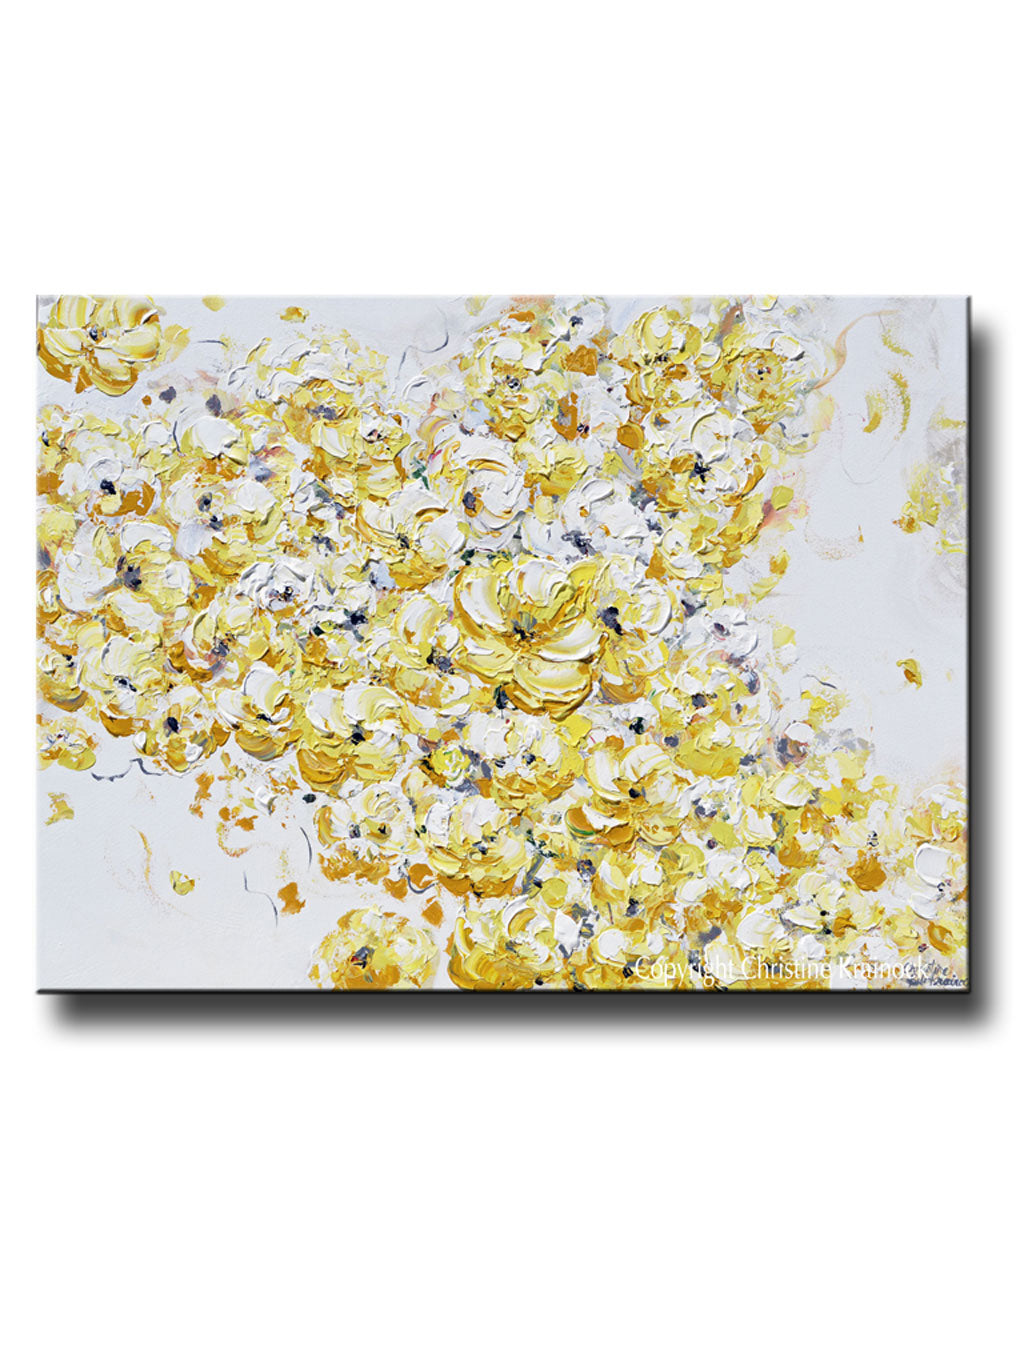 ORIGINAL Art Yellow Grey Abstract Painting Floral Flowers Gold Grey White Wall Decor 30x40"